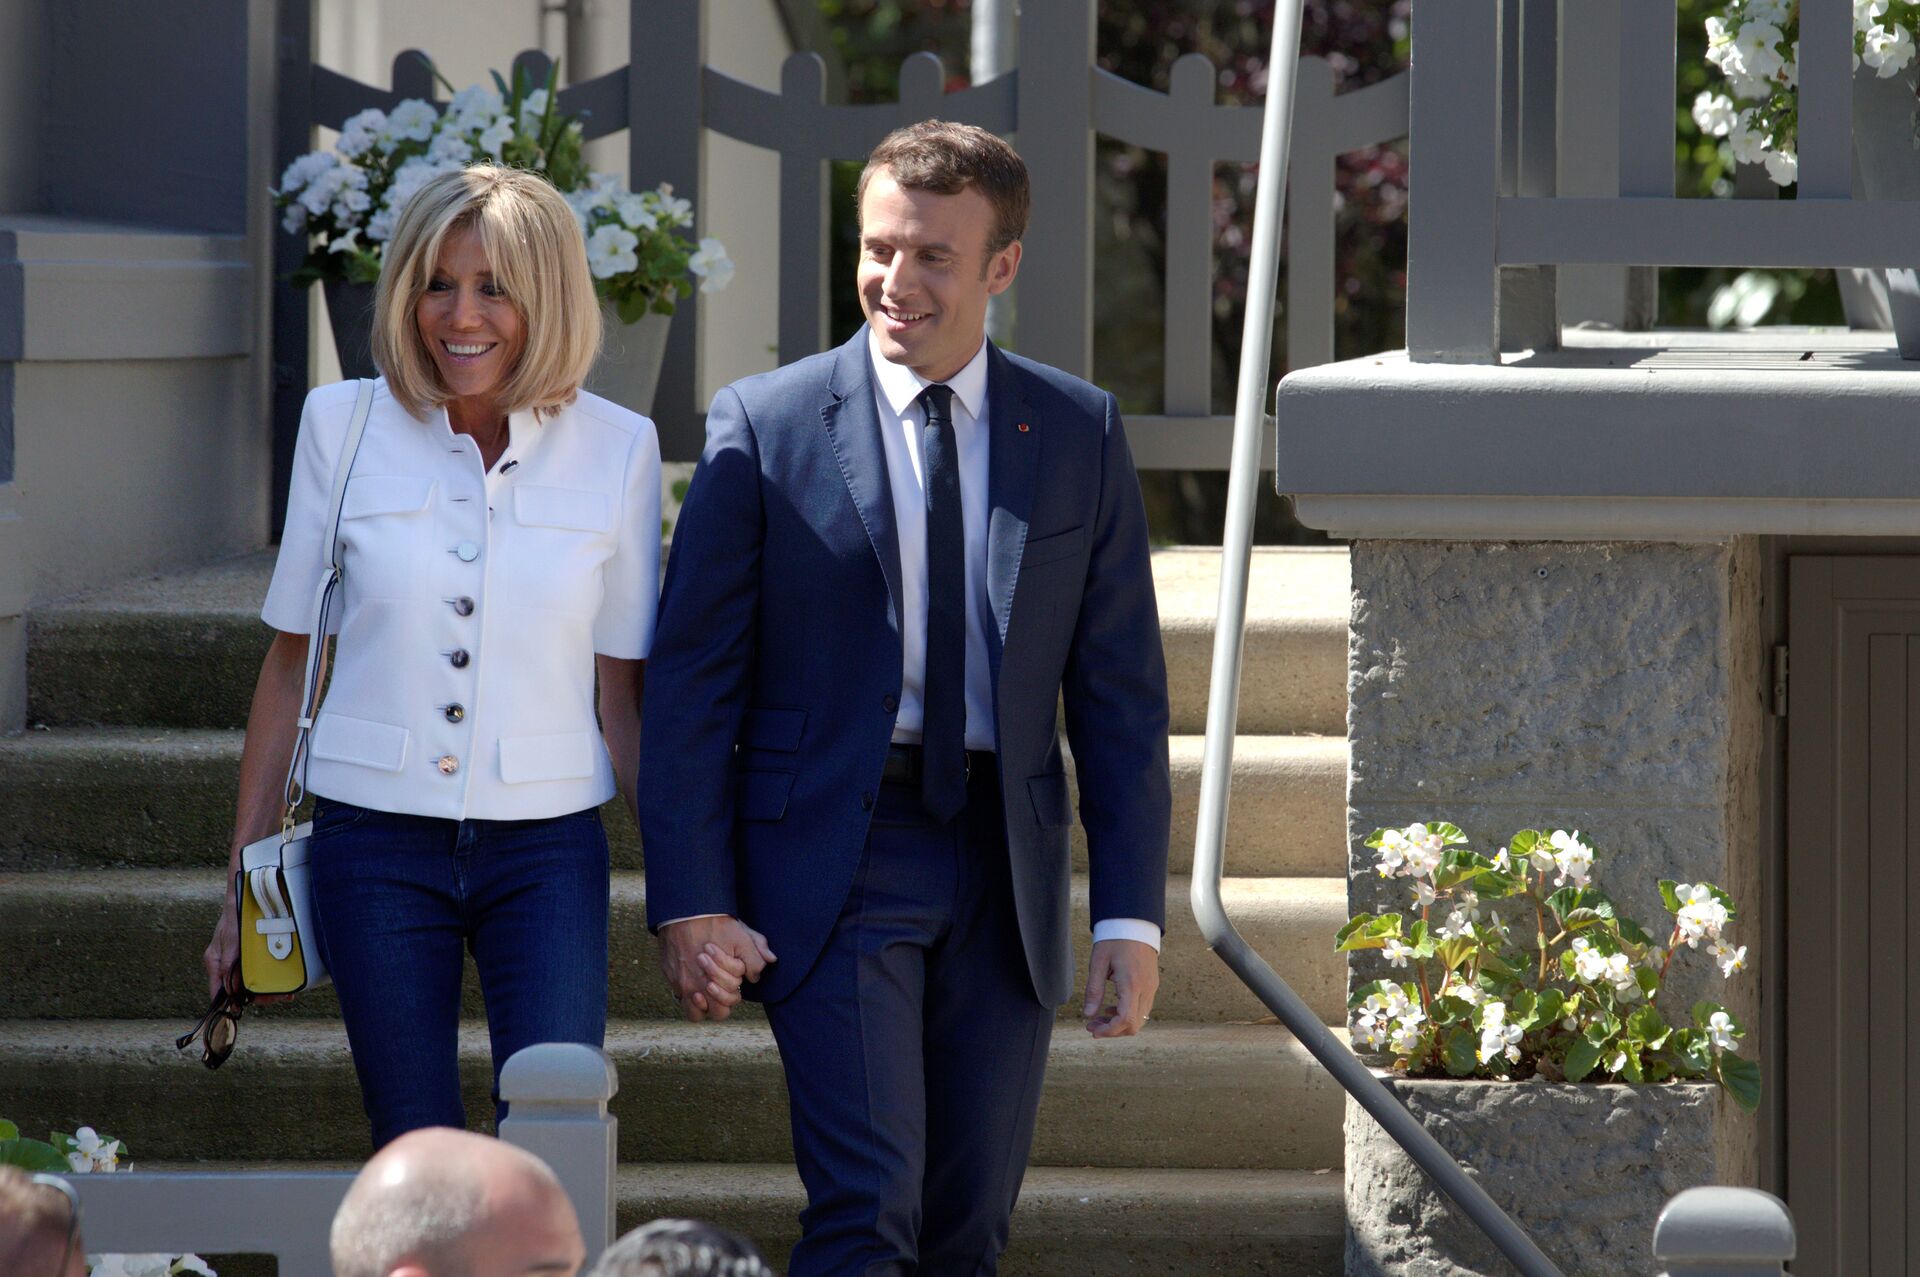 French President Emmanuel Macron and wife Brigitte leave home before voting in the first of two rounds of parliamentary elections in Le Touquet, France, June 11, 2017. - Sputnik International, 1920, 18.02.2022